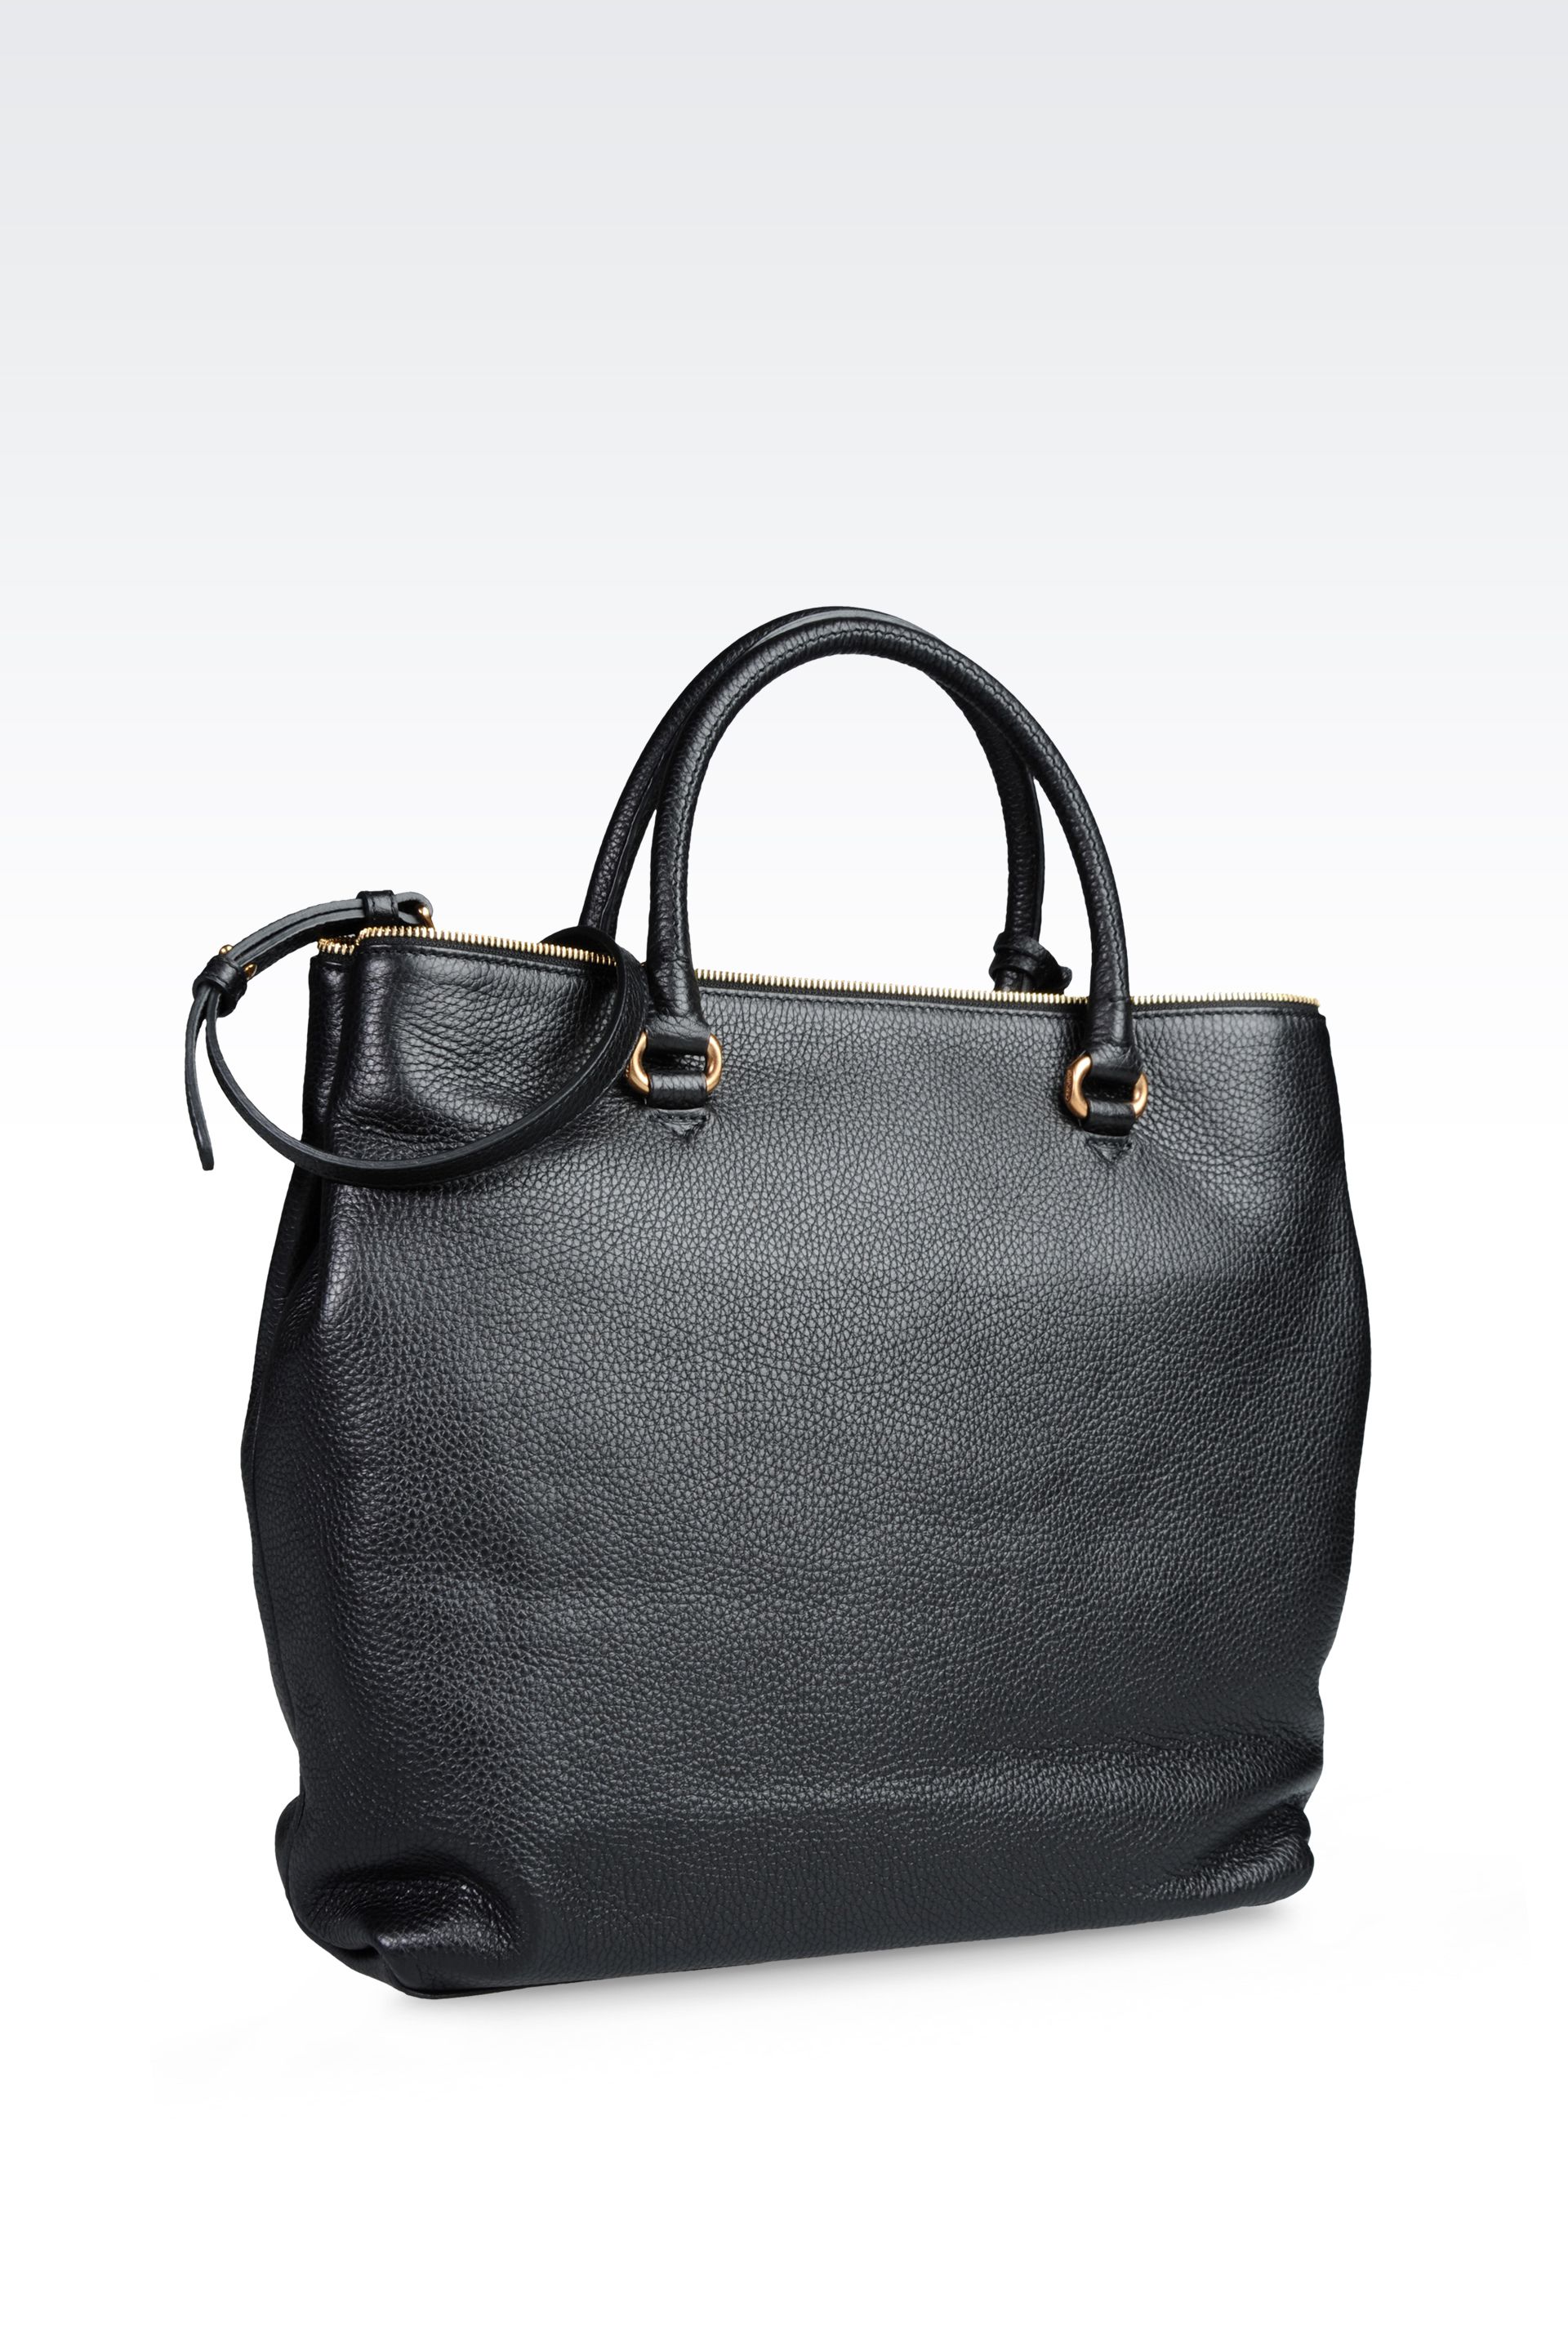 Lyst - Emporio Armani Leather Tote Bag with Full Zip in Black